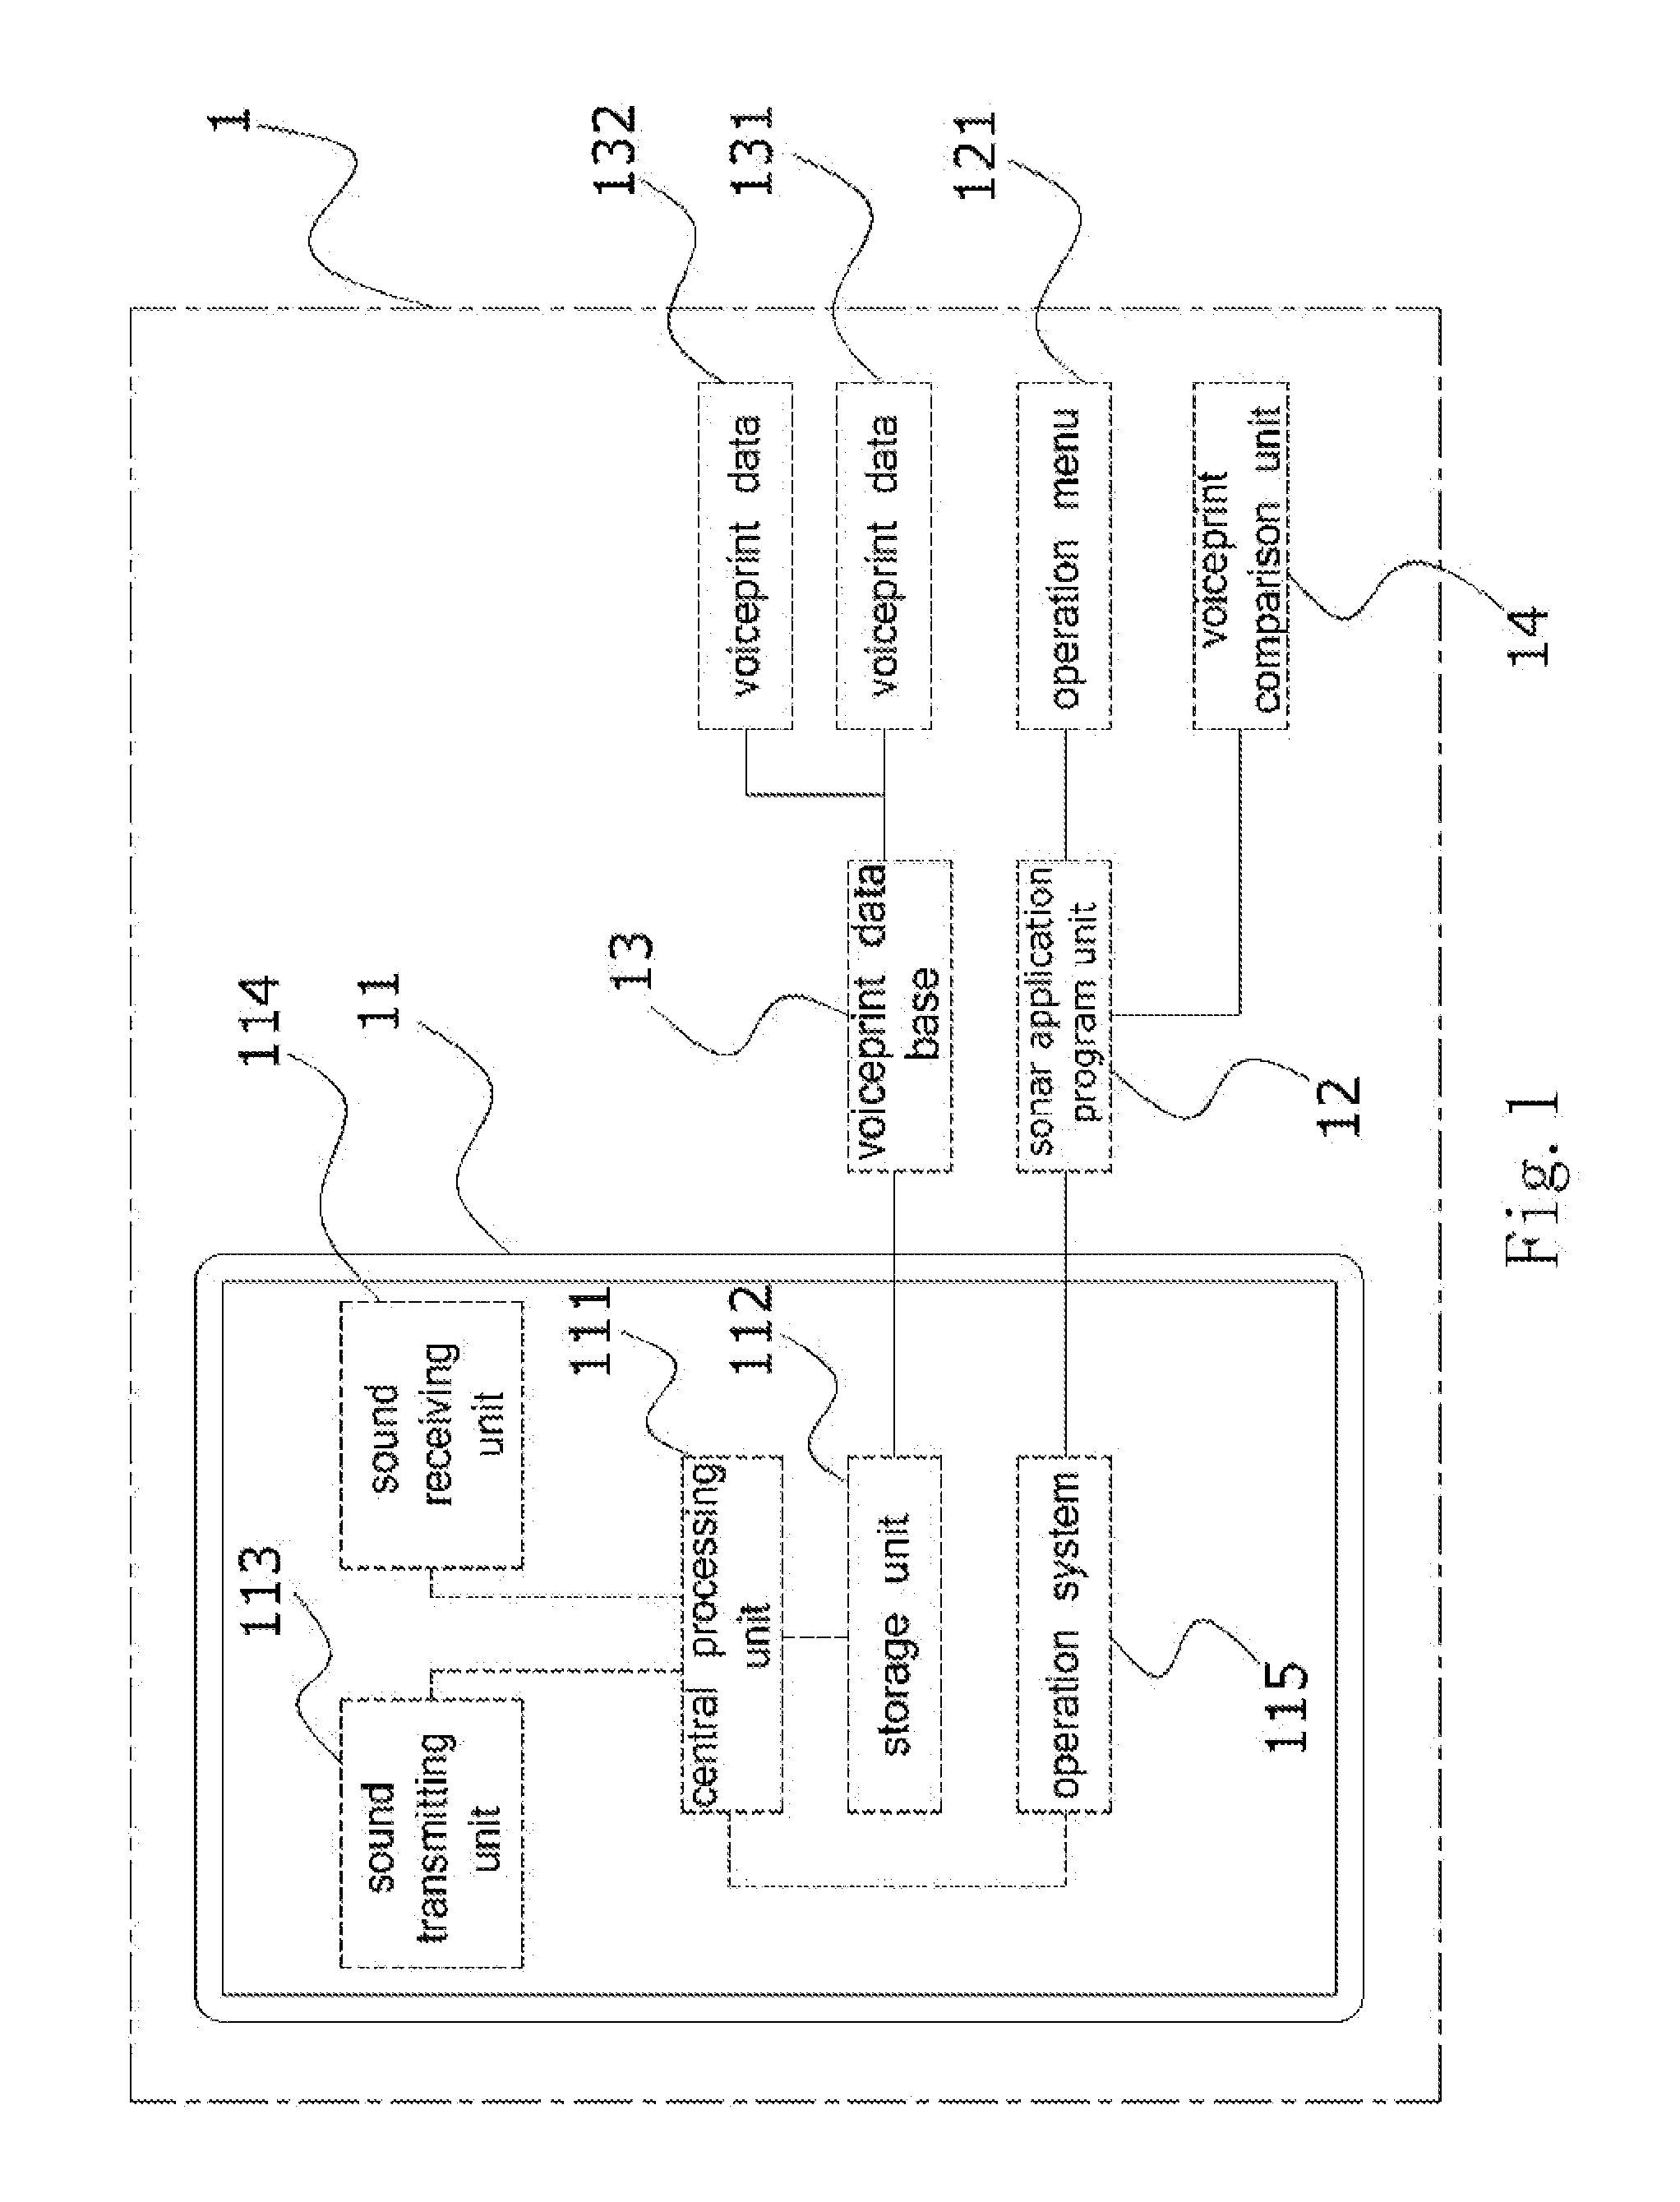 Sonar type object detection system and its implementing method